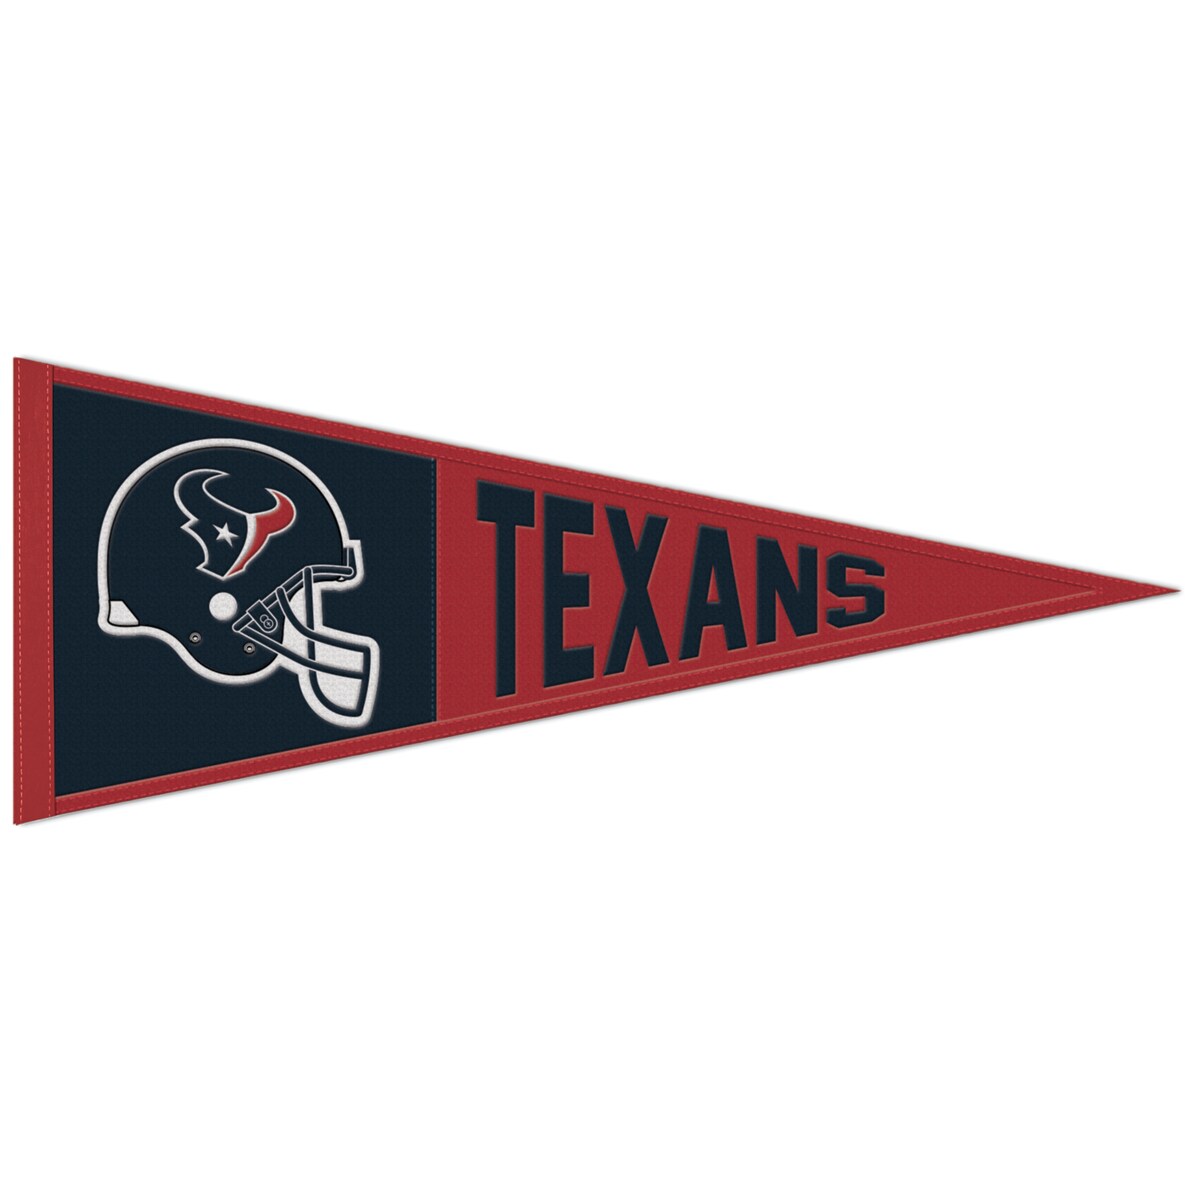 Make your unwavering loyalty to the Houston Texans loud and clear with this 13" x 32" pennant from WinCraft. It features the team's retro logo and their name spelled out, meaning there will be no doubt who you're rooting for on game day. The durable wool fabric makes this the perfect piece of Houston Texans dcor to display outside, in your office or anywhere else.Material: 70% Wool/30% PolyesterDesigned in the USASingle-sided designMeasures approx. 13'' x 32''Officially licensedImportedEmbroidered fabric appliqueWipe clean with a damp clothBrand: WinCraft